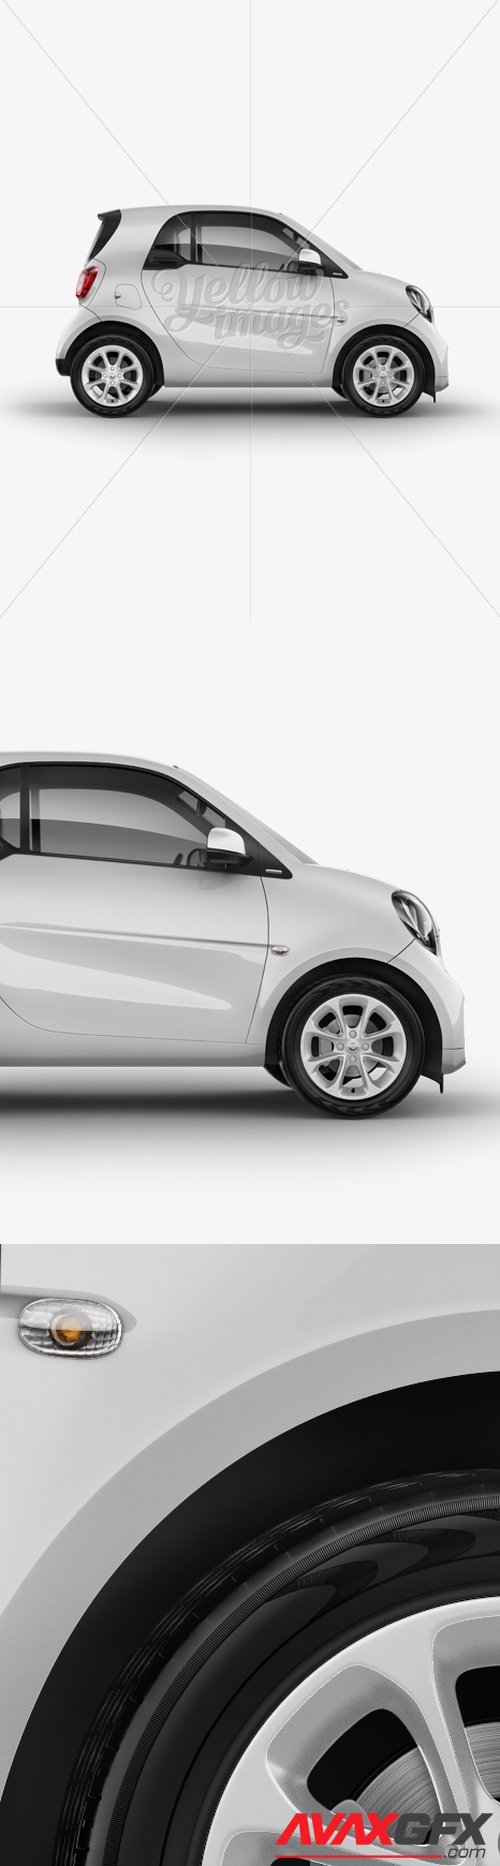 Smart Fortwo Mockup - Side View 14045 TIF